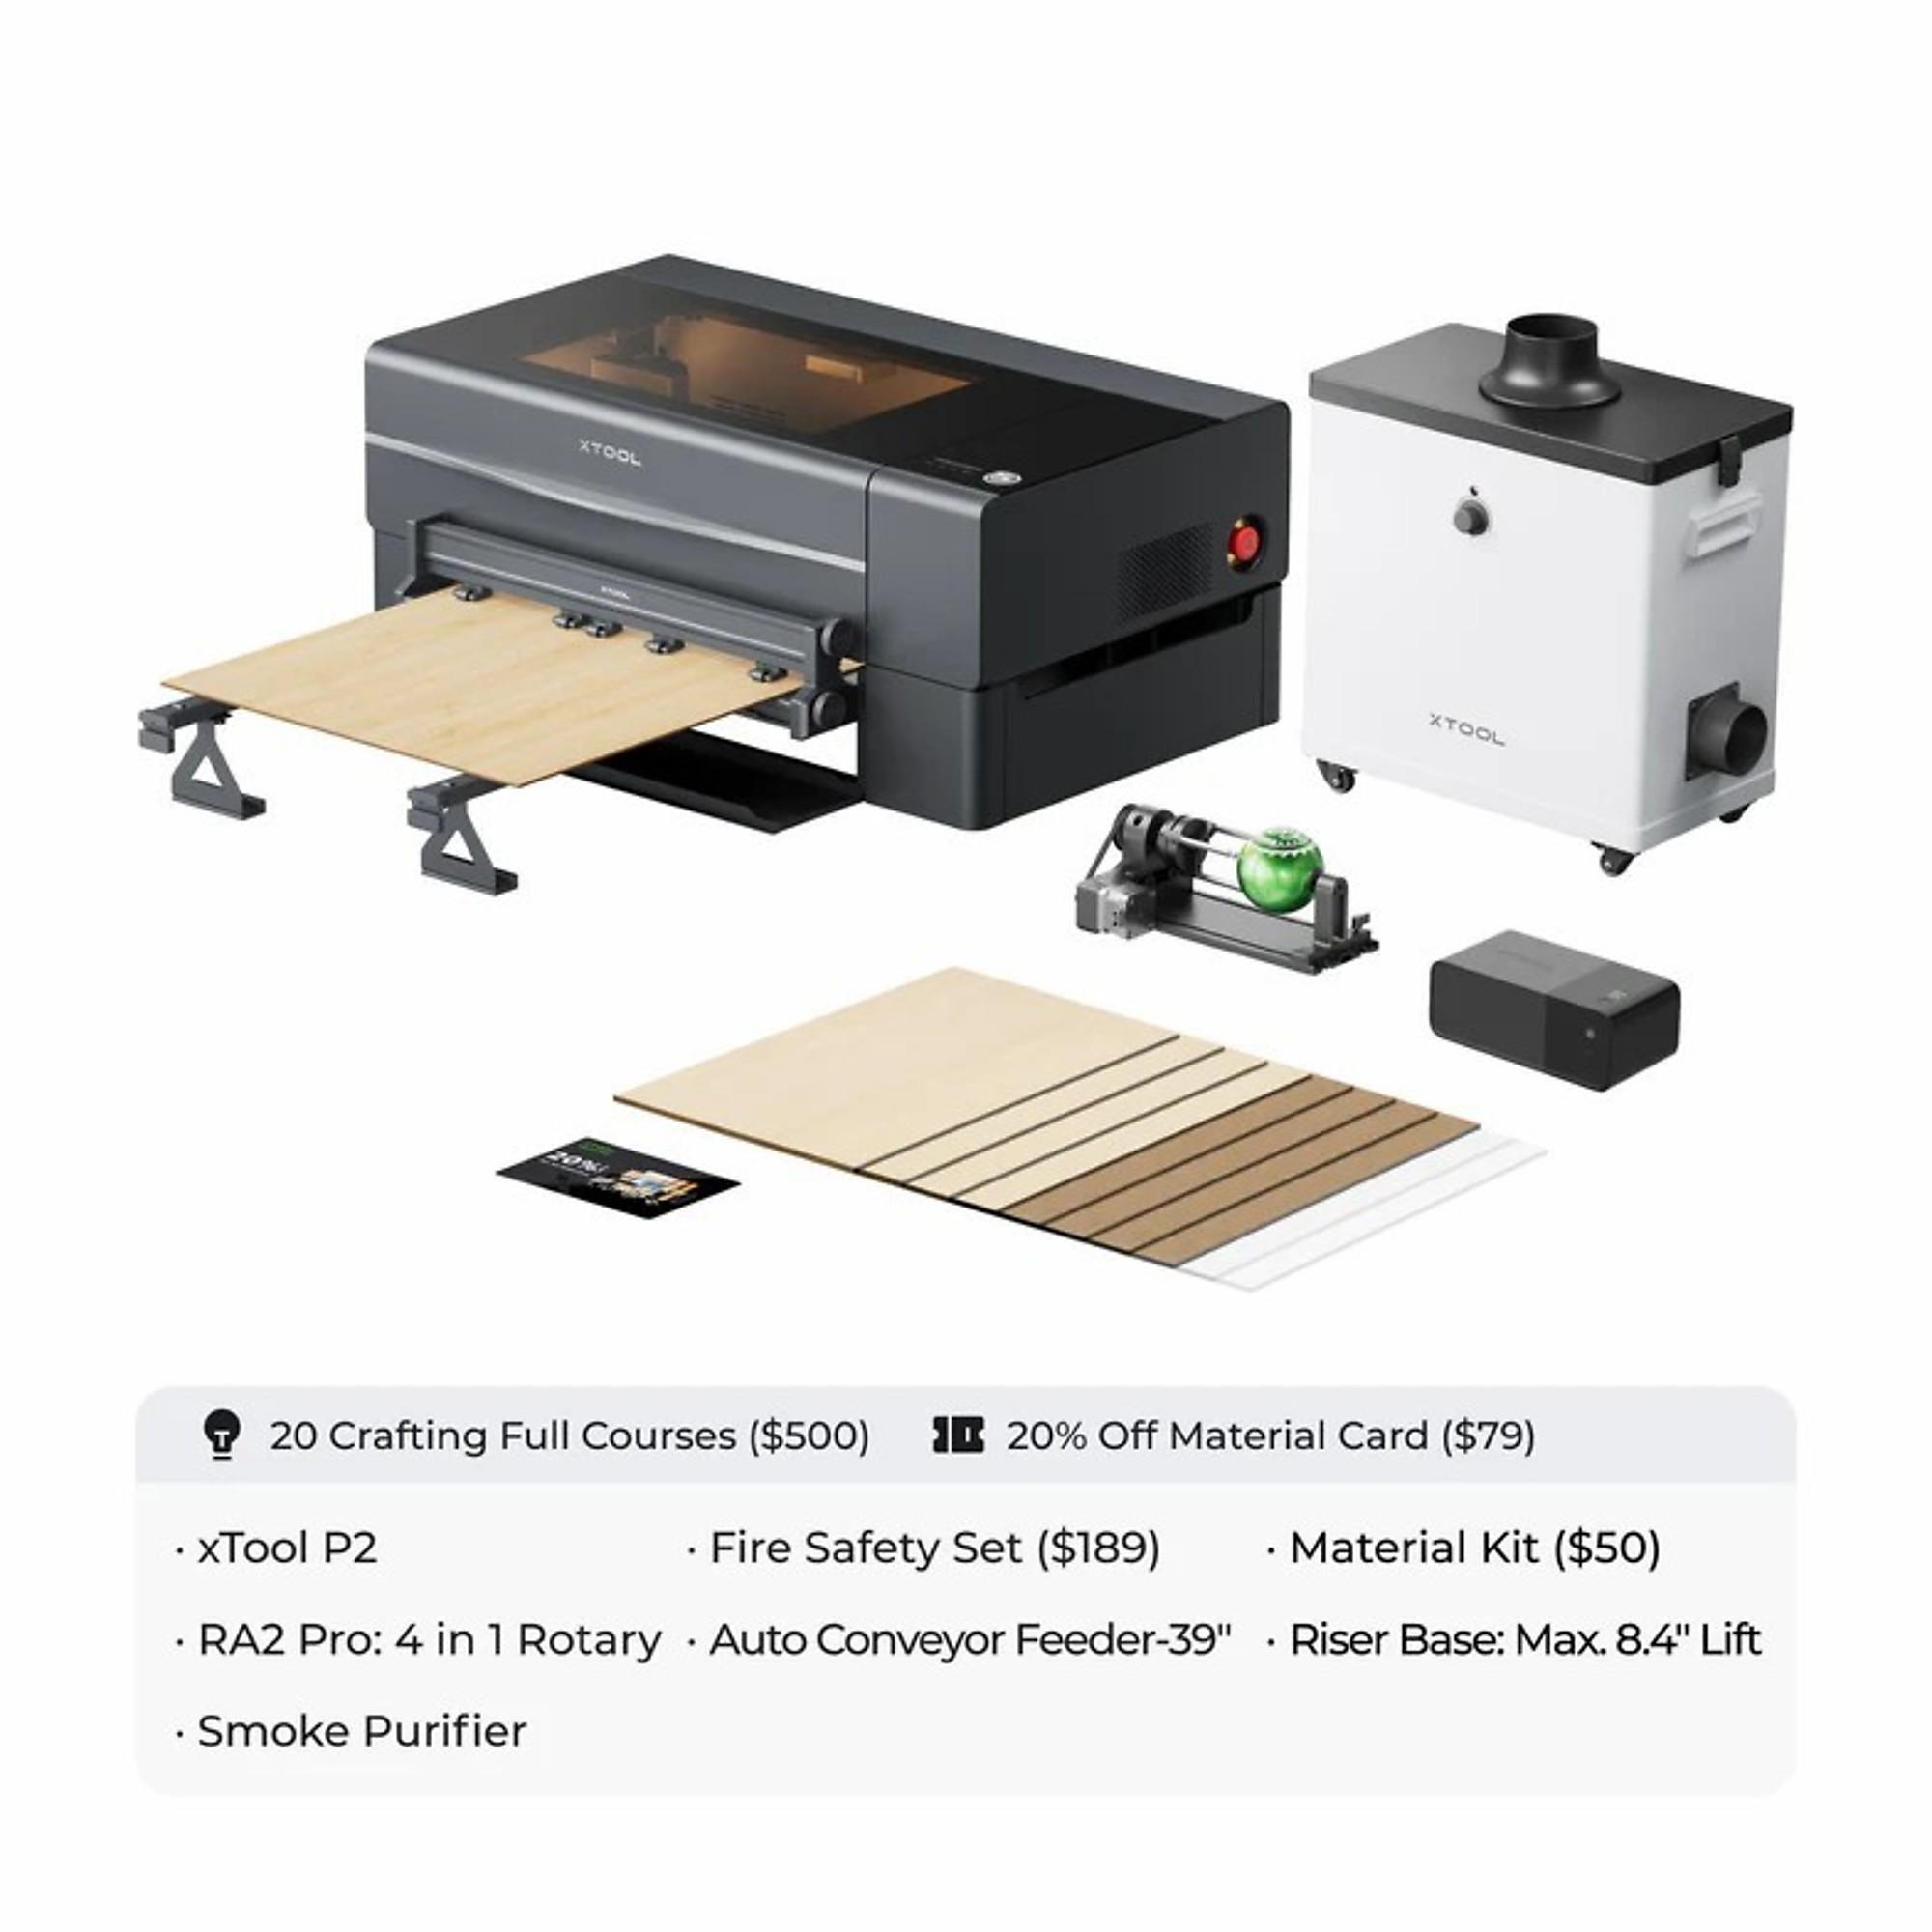 xTool, Laser Cutter and Engraver, 55w, 600mm/s, Model, Working Width 29.13 in, Working Length 44.09 in, Laser Power 55 W, Model P1030386-279-296-239-